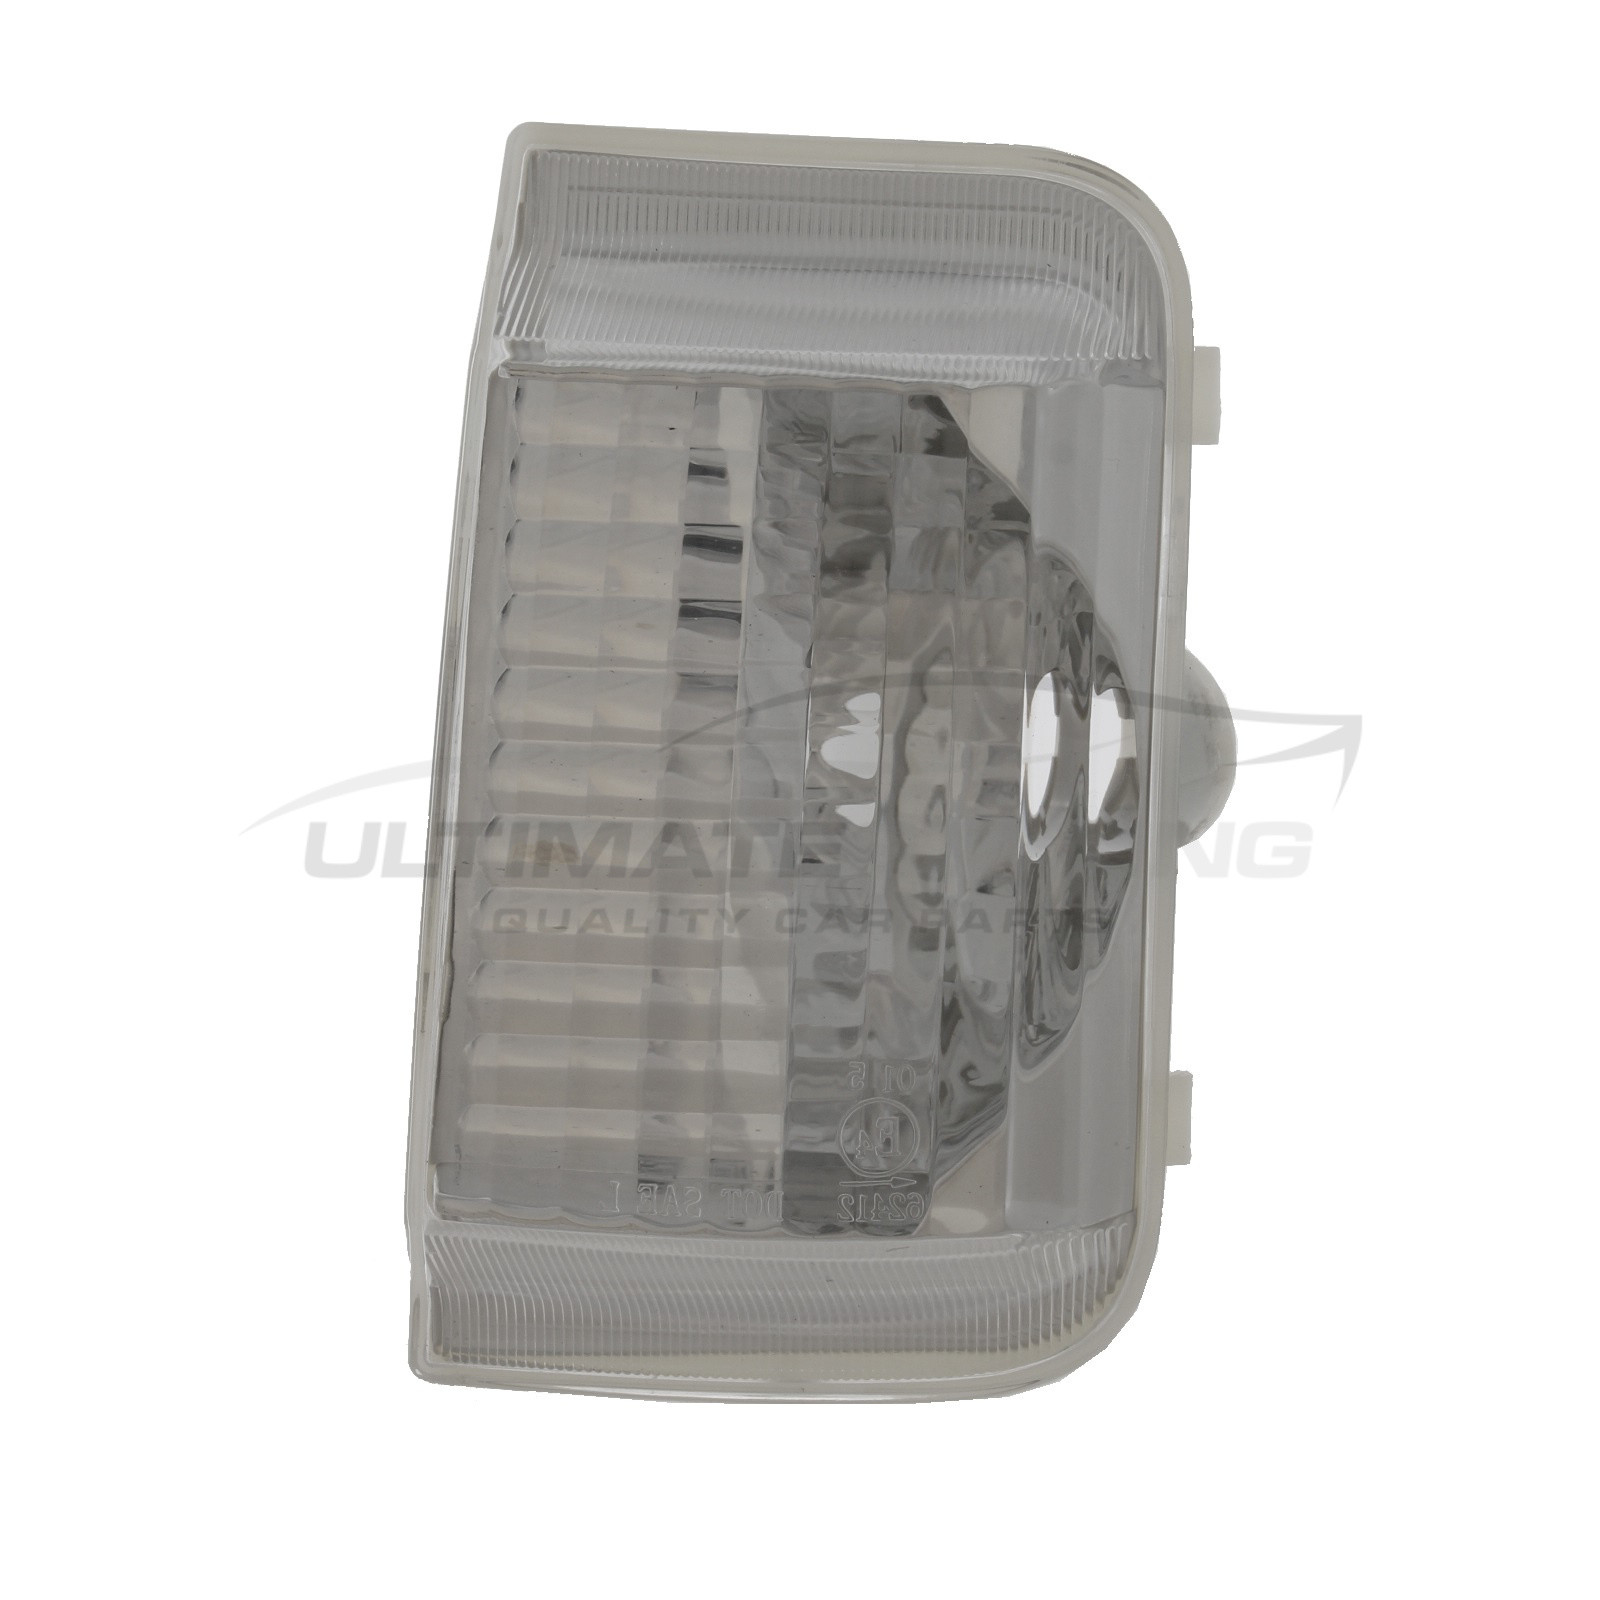 Citroen Relay 2006->, Fiat Ducato 2006->, Peugeot Boxer 2006->, Vauxhall Movano 2021-> Clear Non-LED To Suit Amber Bulb (Not Included) Mirror Indicator Excludes Amber Reflector Drivers Side (RH)